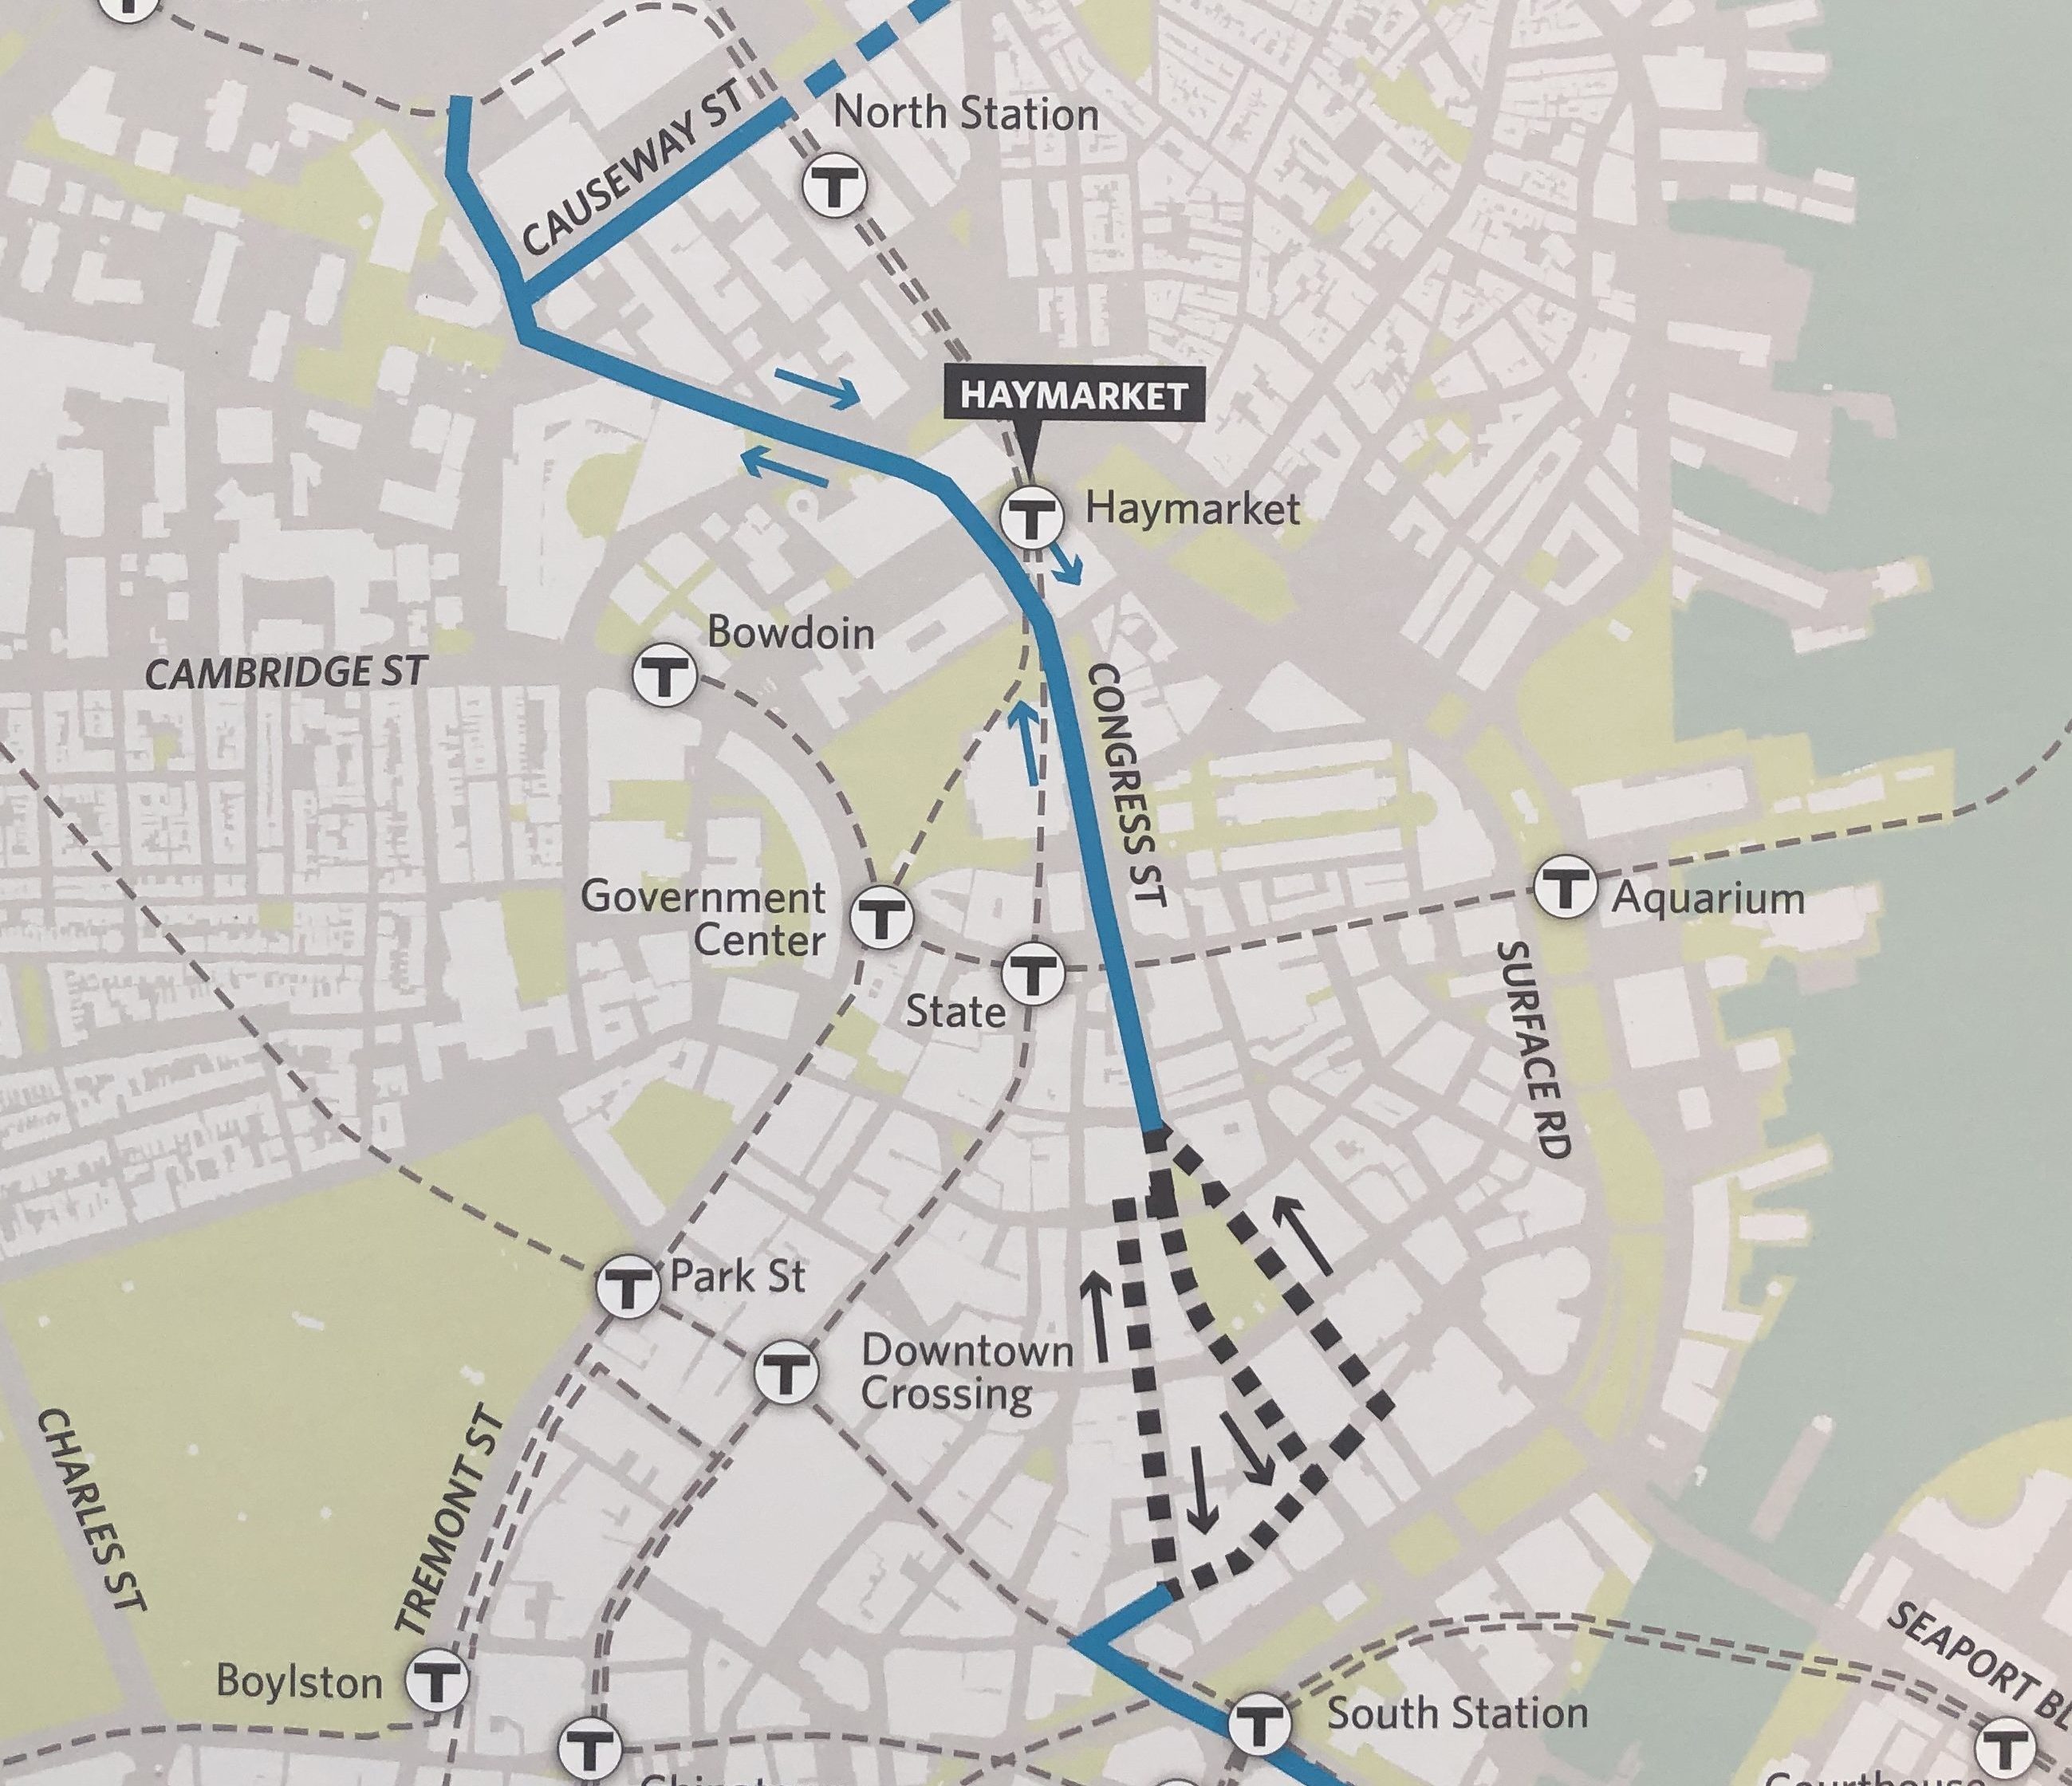 A map of the City of Boston's proposed route for a new "multimodal corridor" between North and South Stations. The route includes Causeway Street in front of North Station, Congress Street between Causeway and Post Office Square, and either Federal, Congress, or Pearl Street (to be determined) to Dewey Square and South Station. From there, the route would continue onto Summer Street into the Seaport.